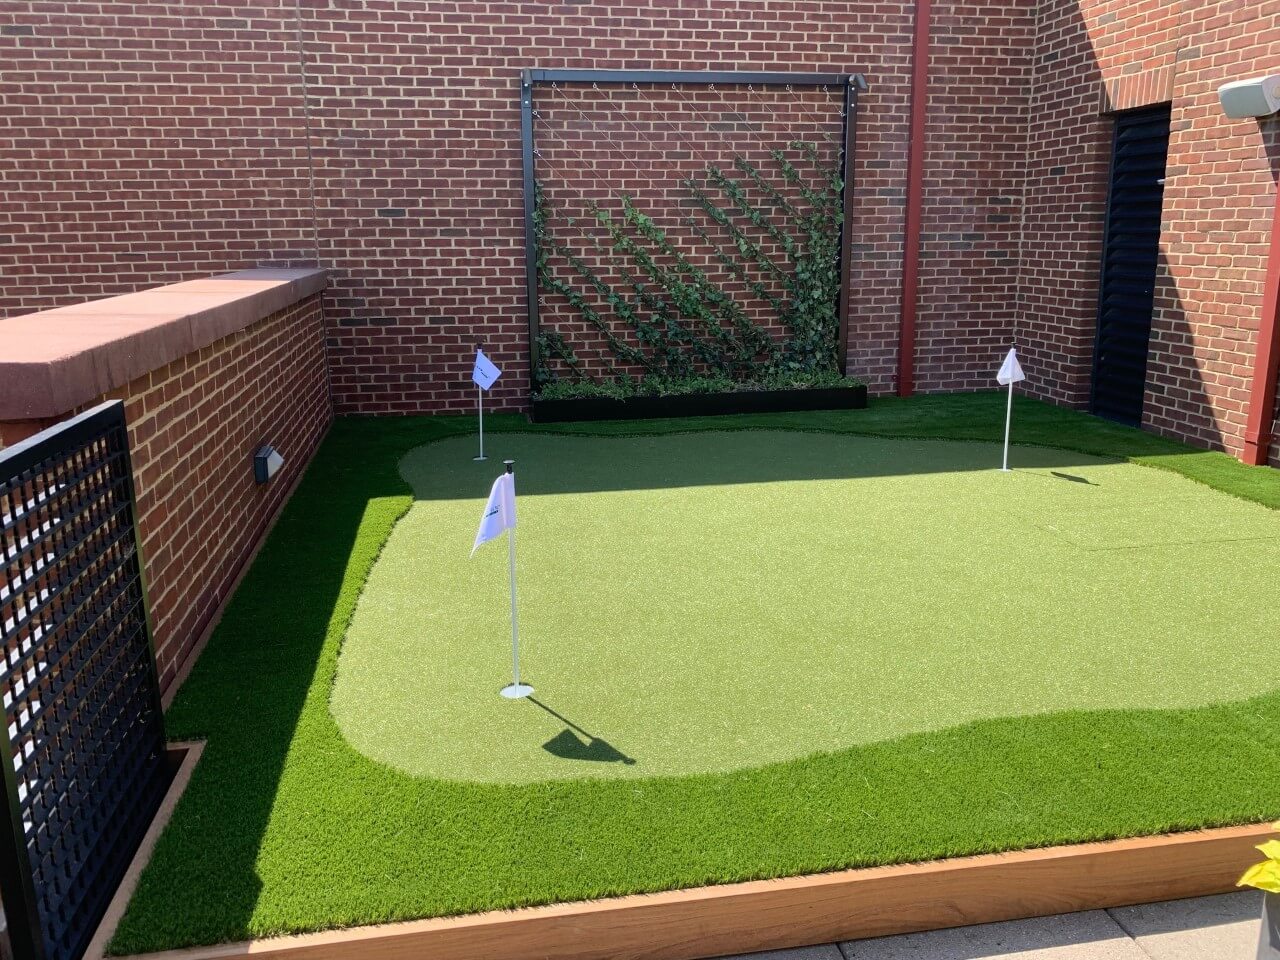 Putting green made with artificial turf